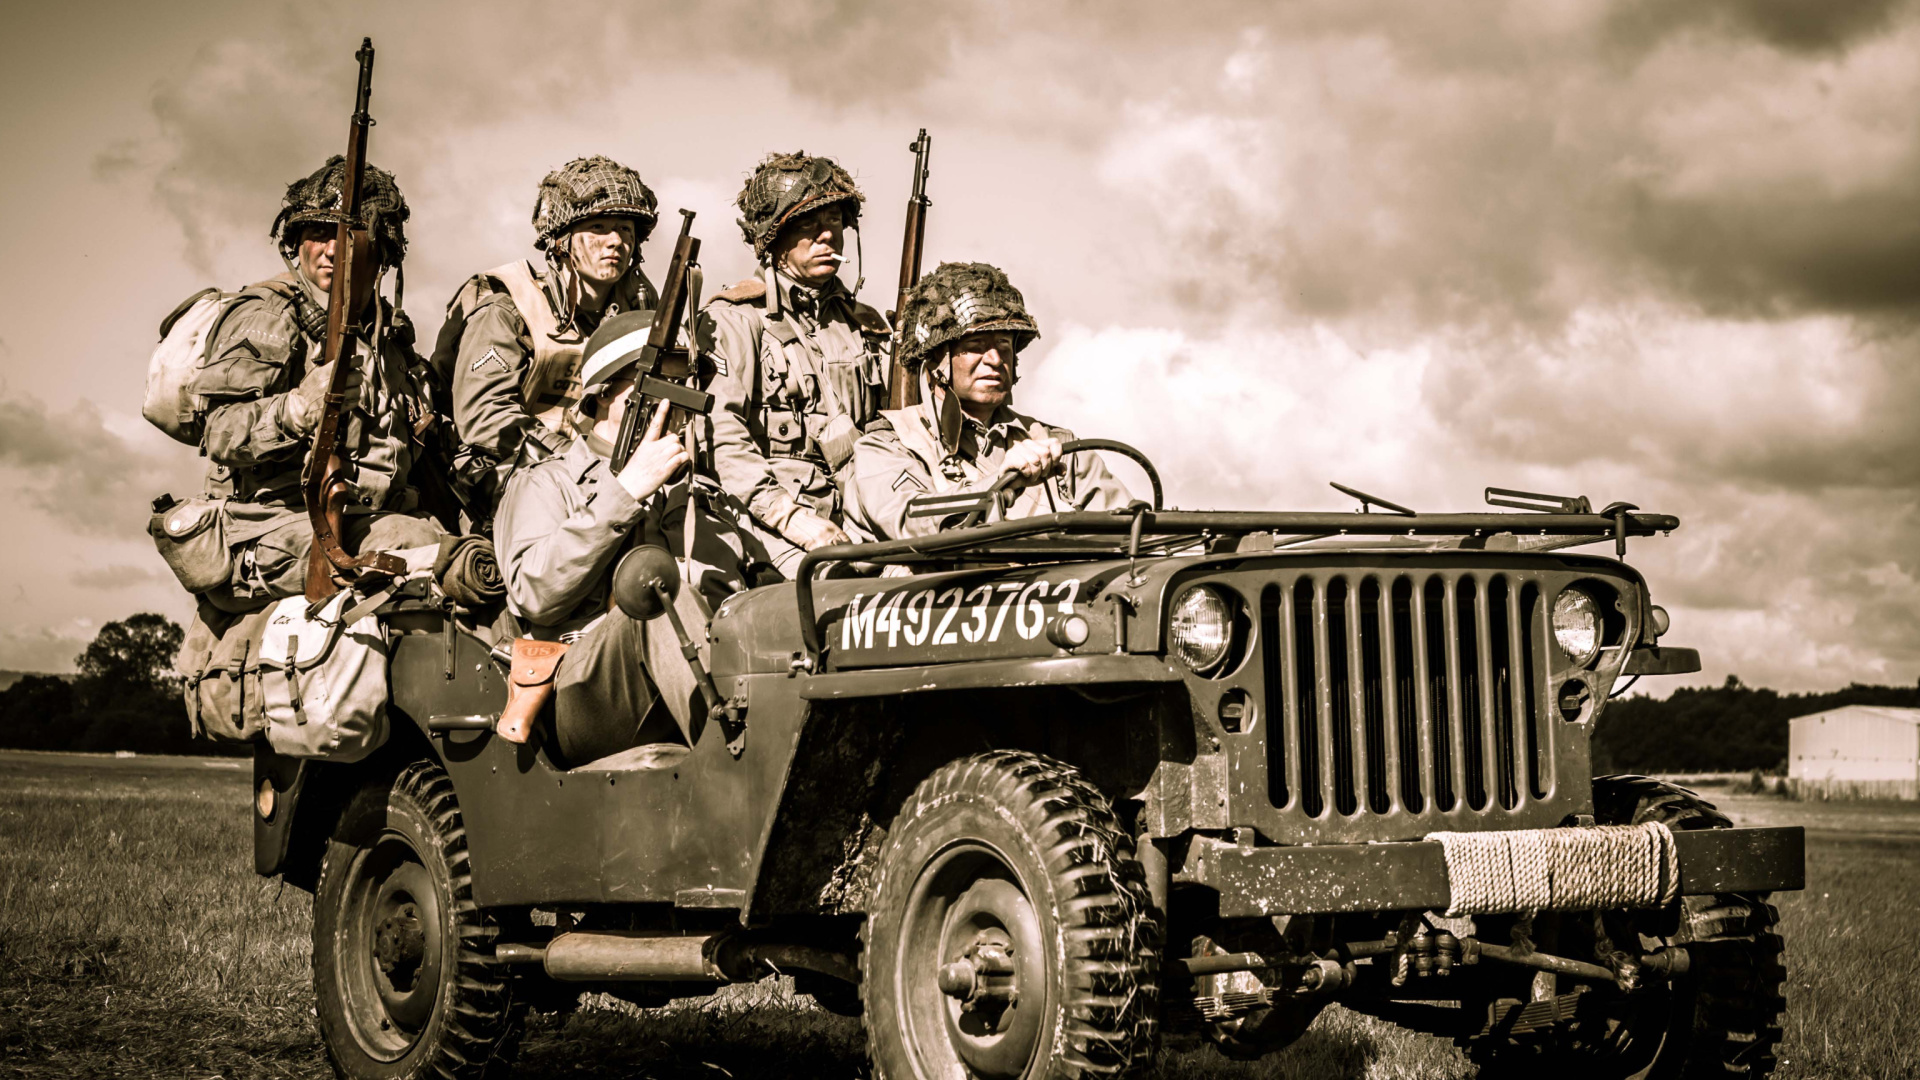 Soldiers on Jeep wallpaper 1920x1080